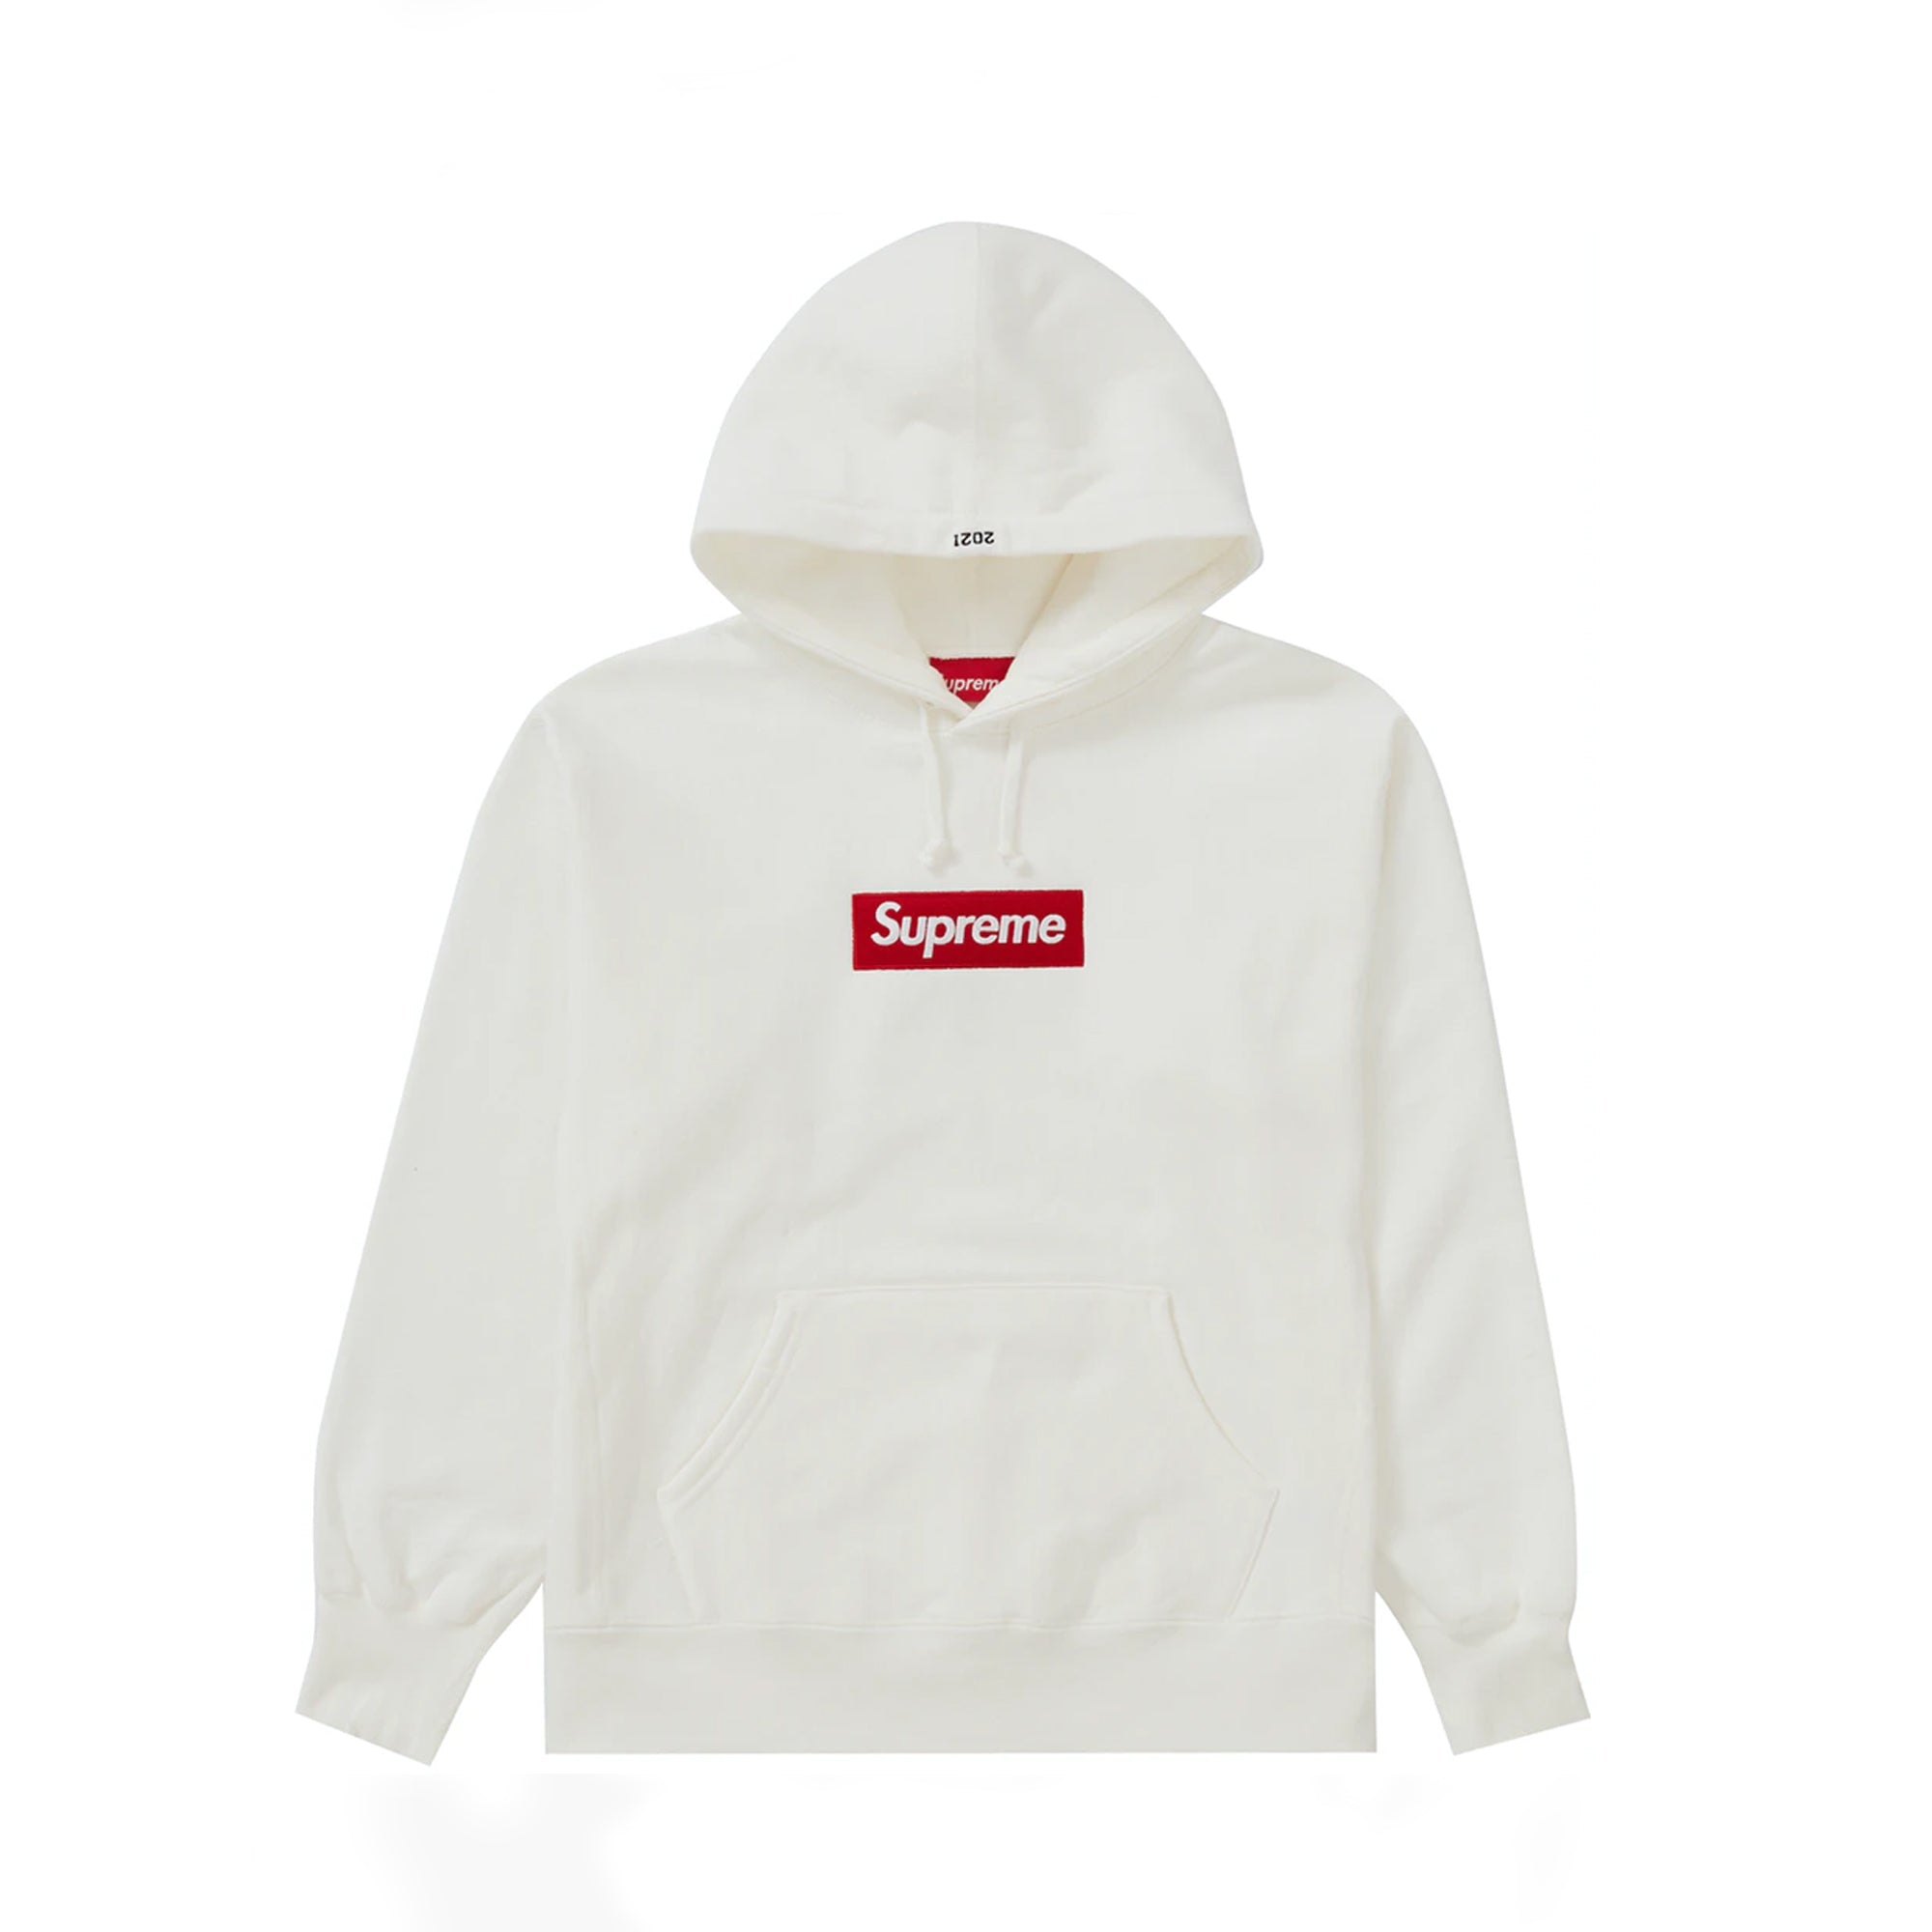 Supreme Football Zip Up Hooded White